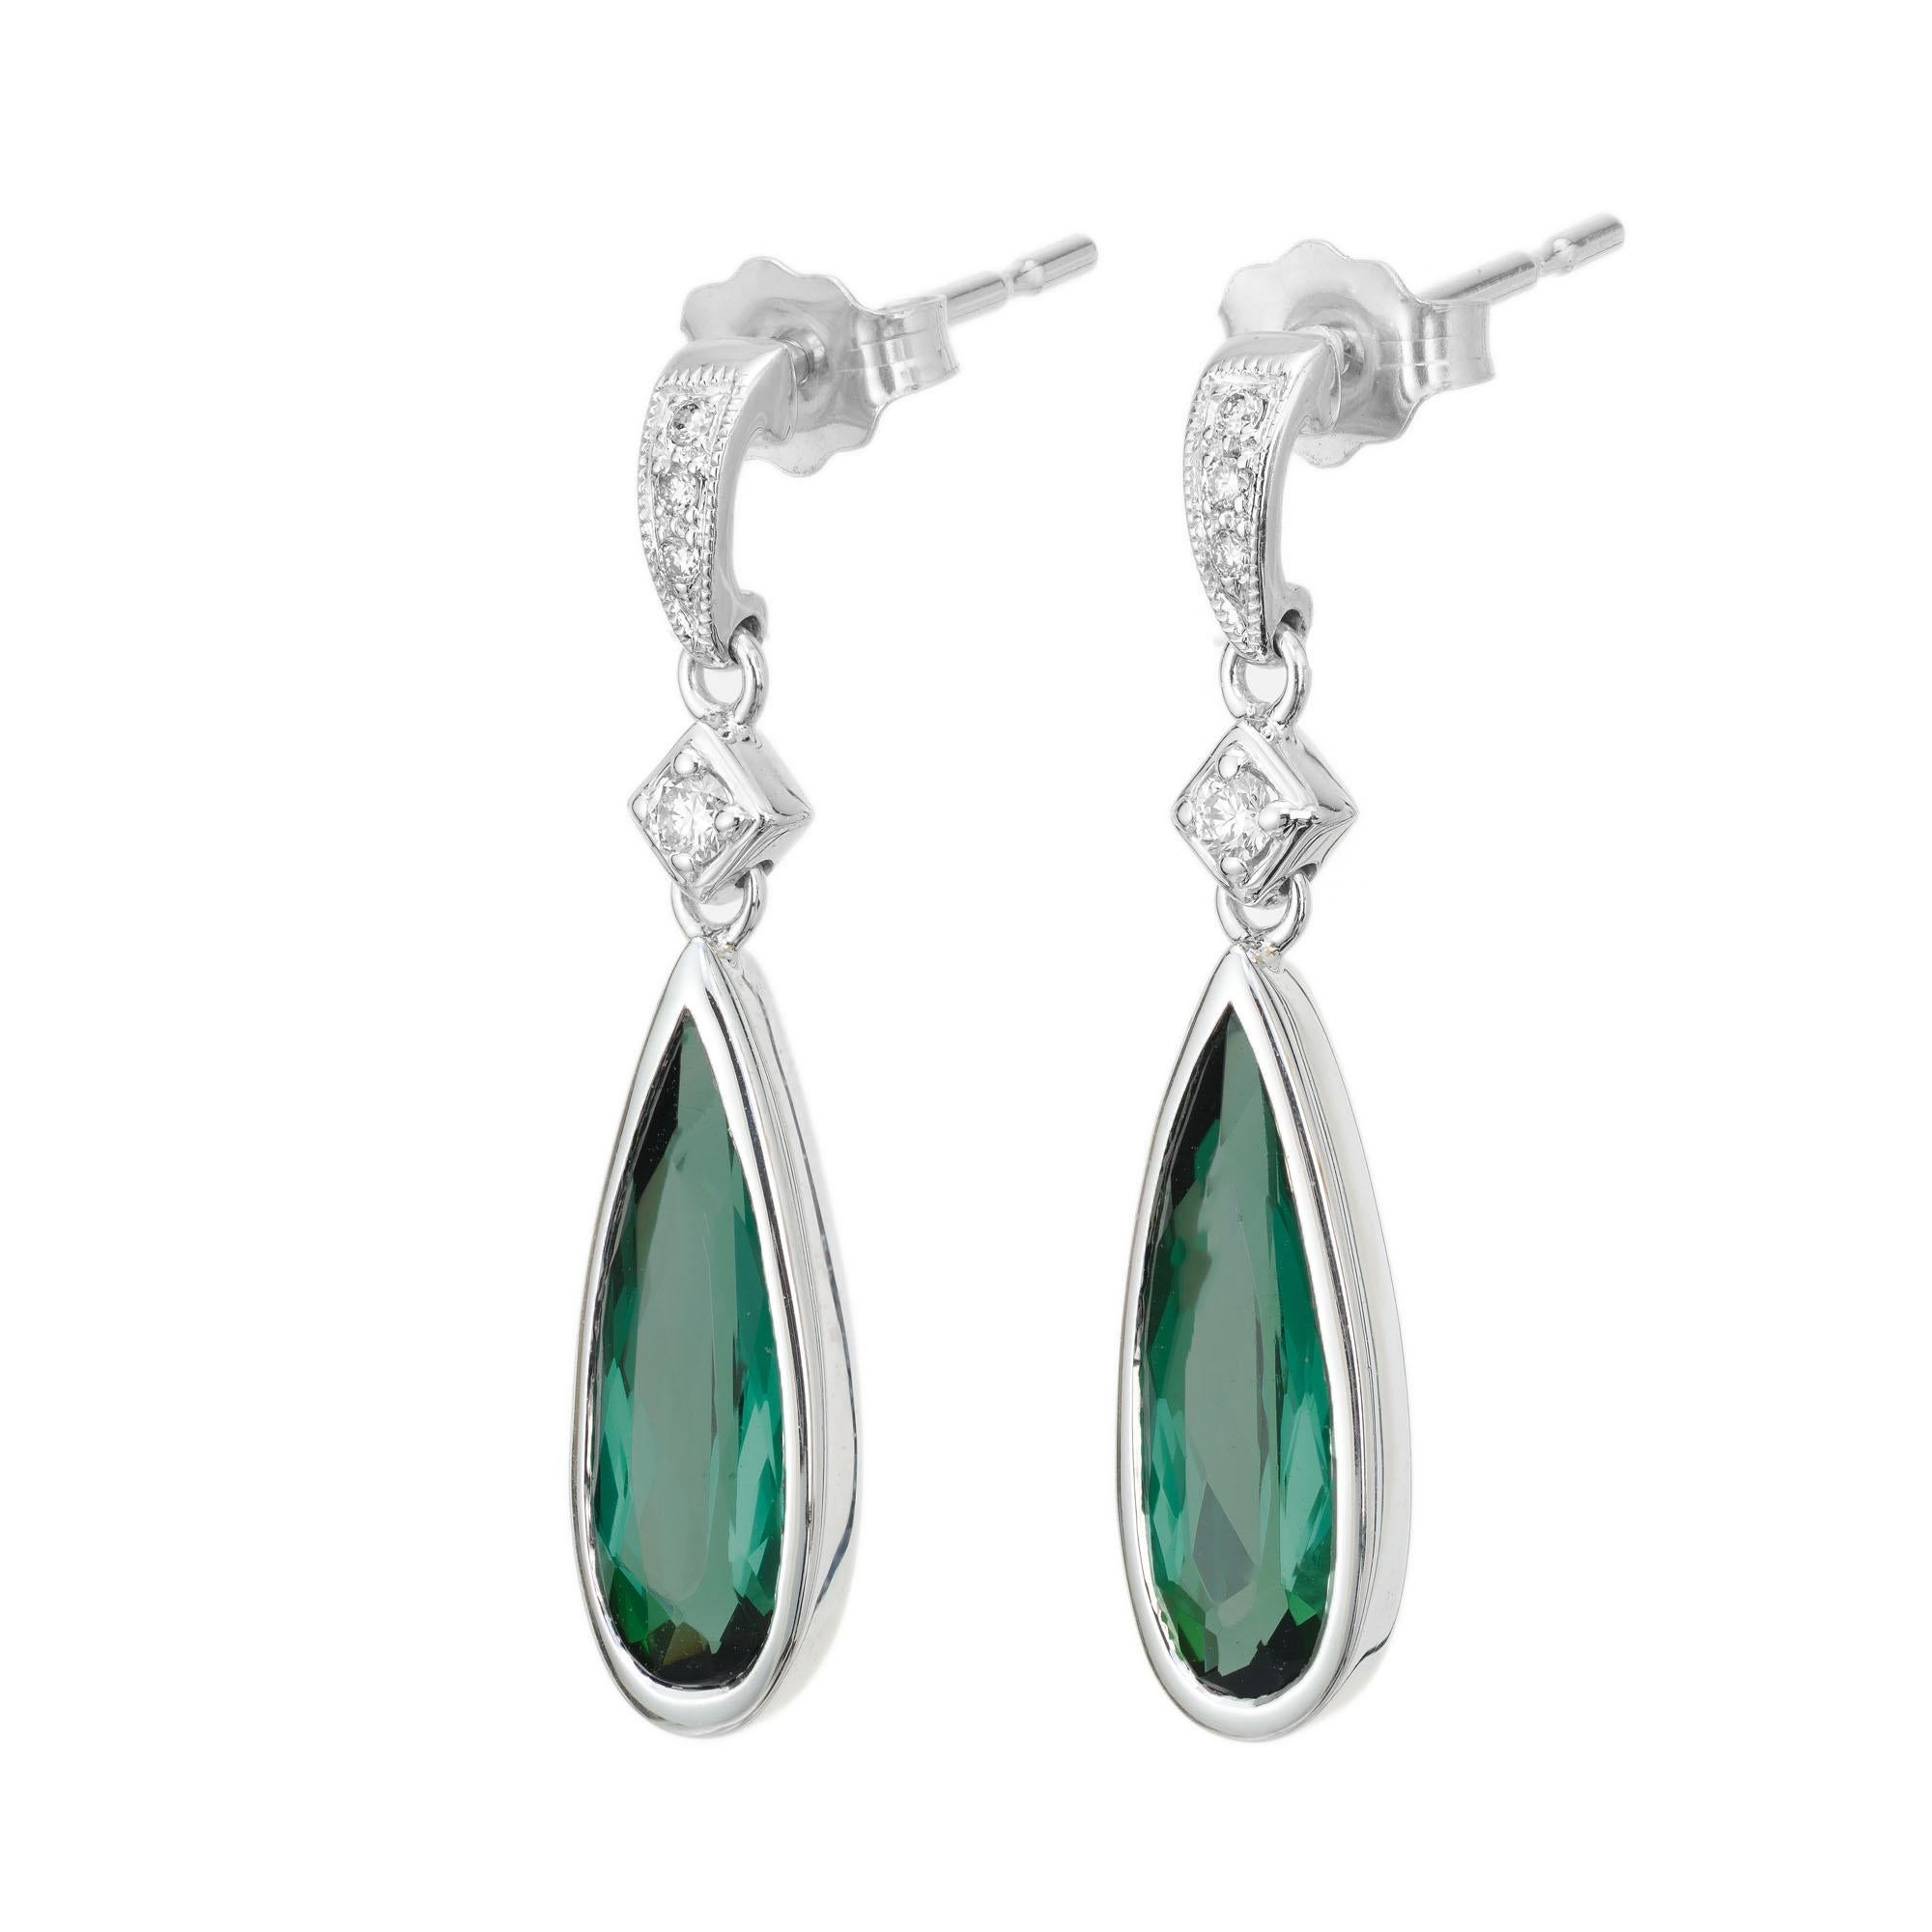 Green pear-shaped tourmaline and diamond dangle earrings. Tourmaline dangles with 8 round brilliant cut accent diamonds in 14k white gold. Designed and crafted in the Peter Suchy workshop.

2 pear shaped green tourmaline, approx. 2.17cts
8 round